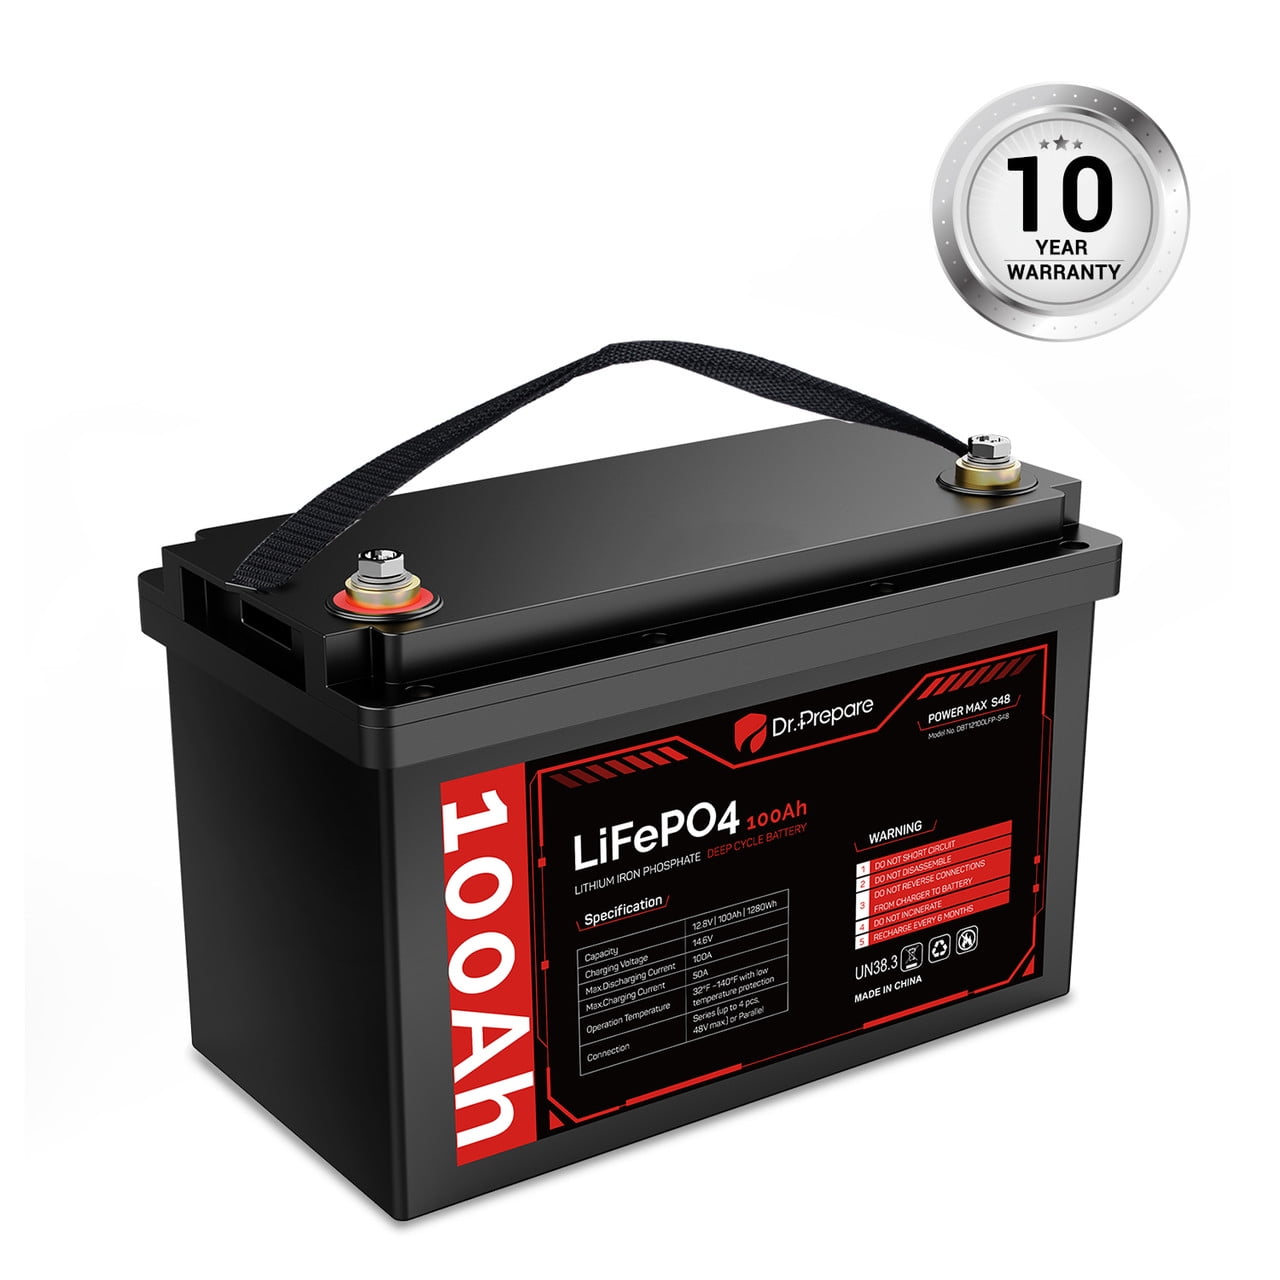 Dr. Prepare 100Ah LiFePO4 Lithium Deep Cycle Battery with LED